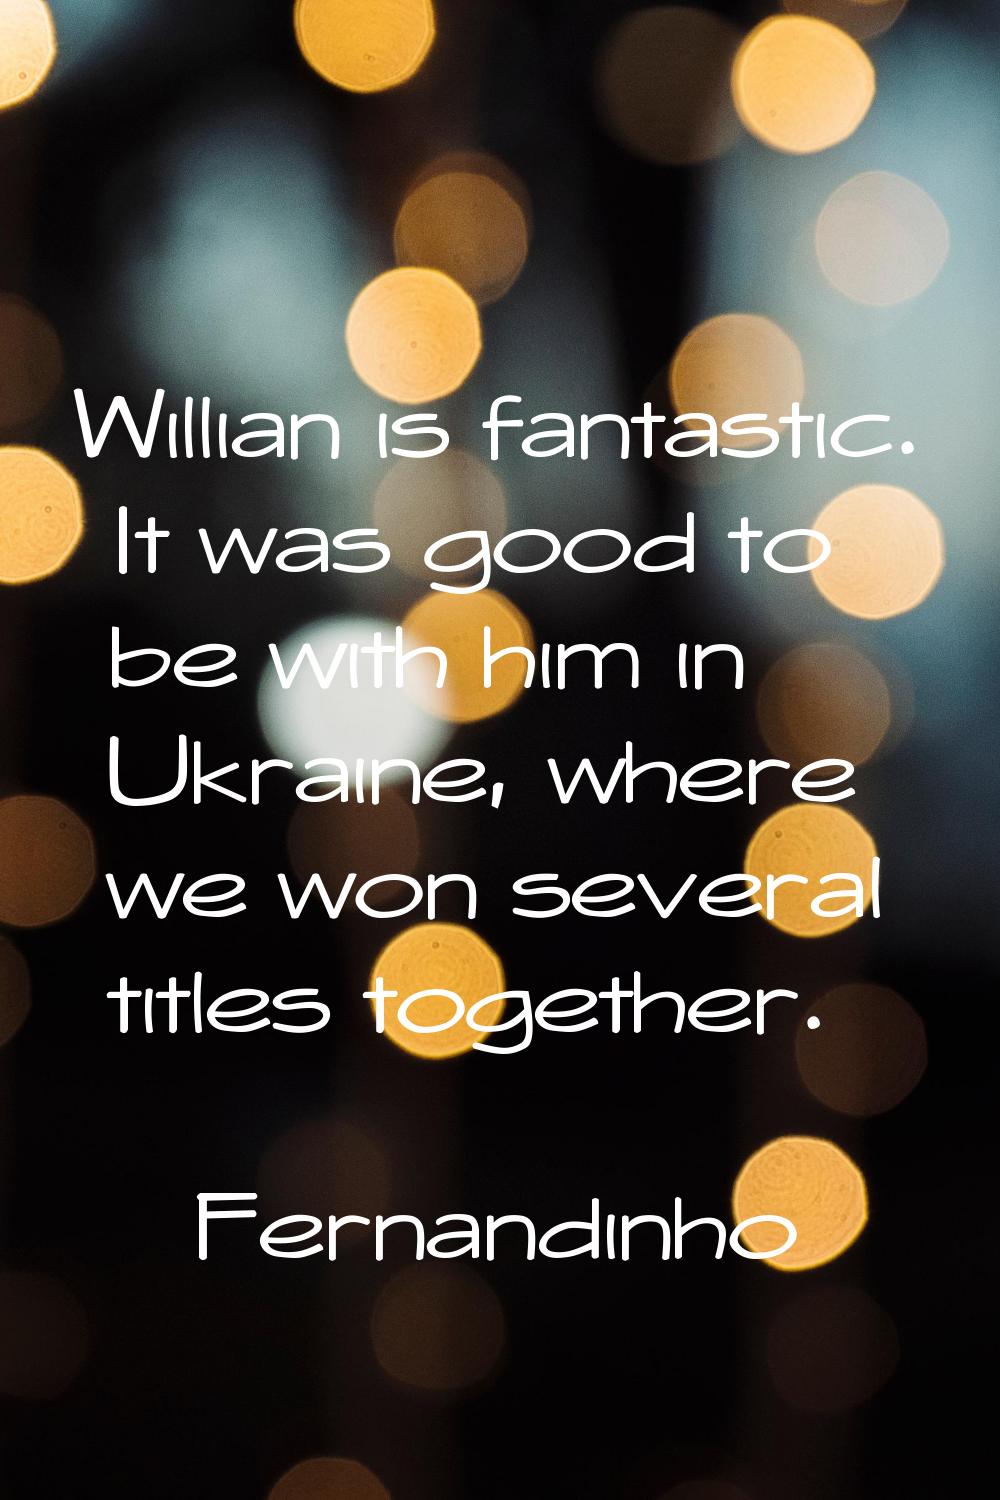 Willian is fantastic. It was good to be with him in Ukraine, where we won several titles together.